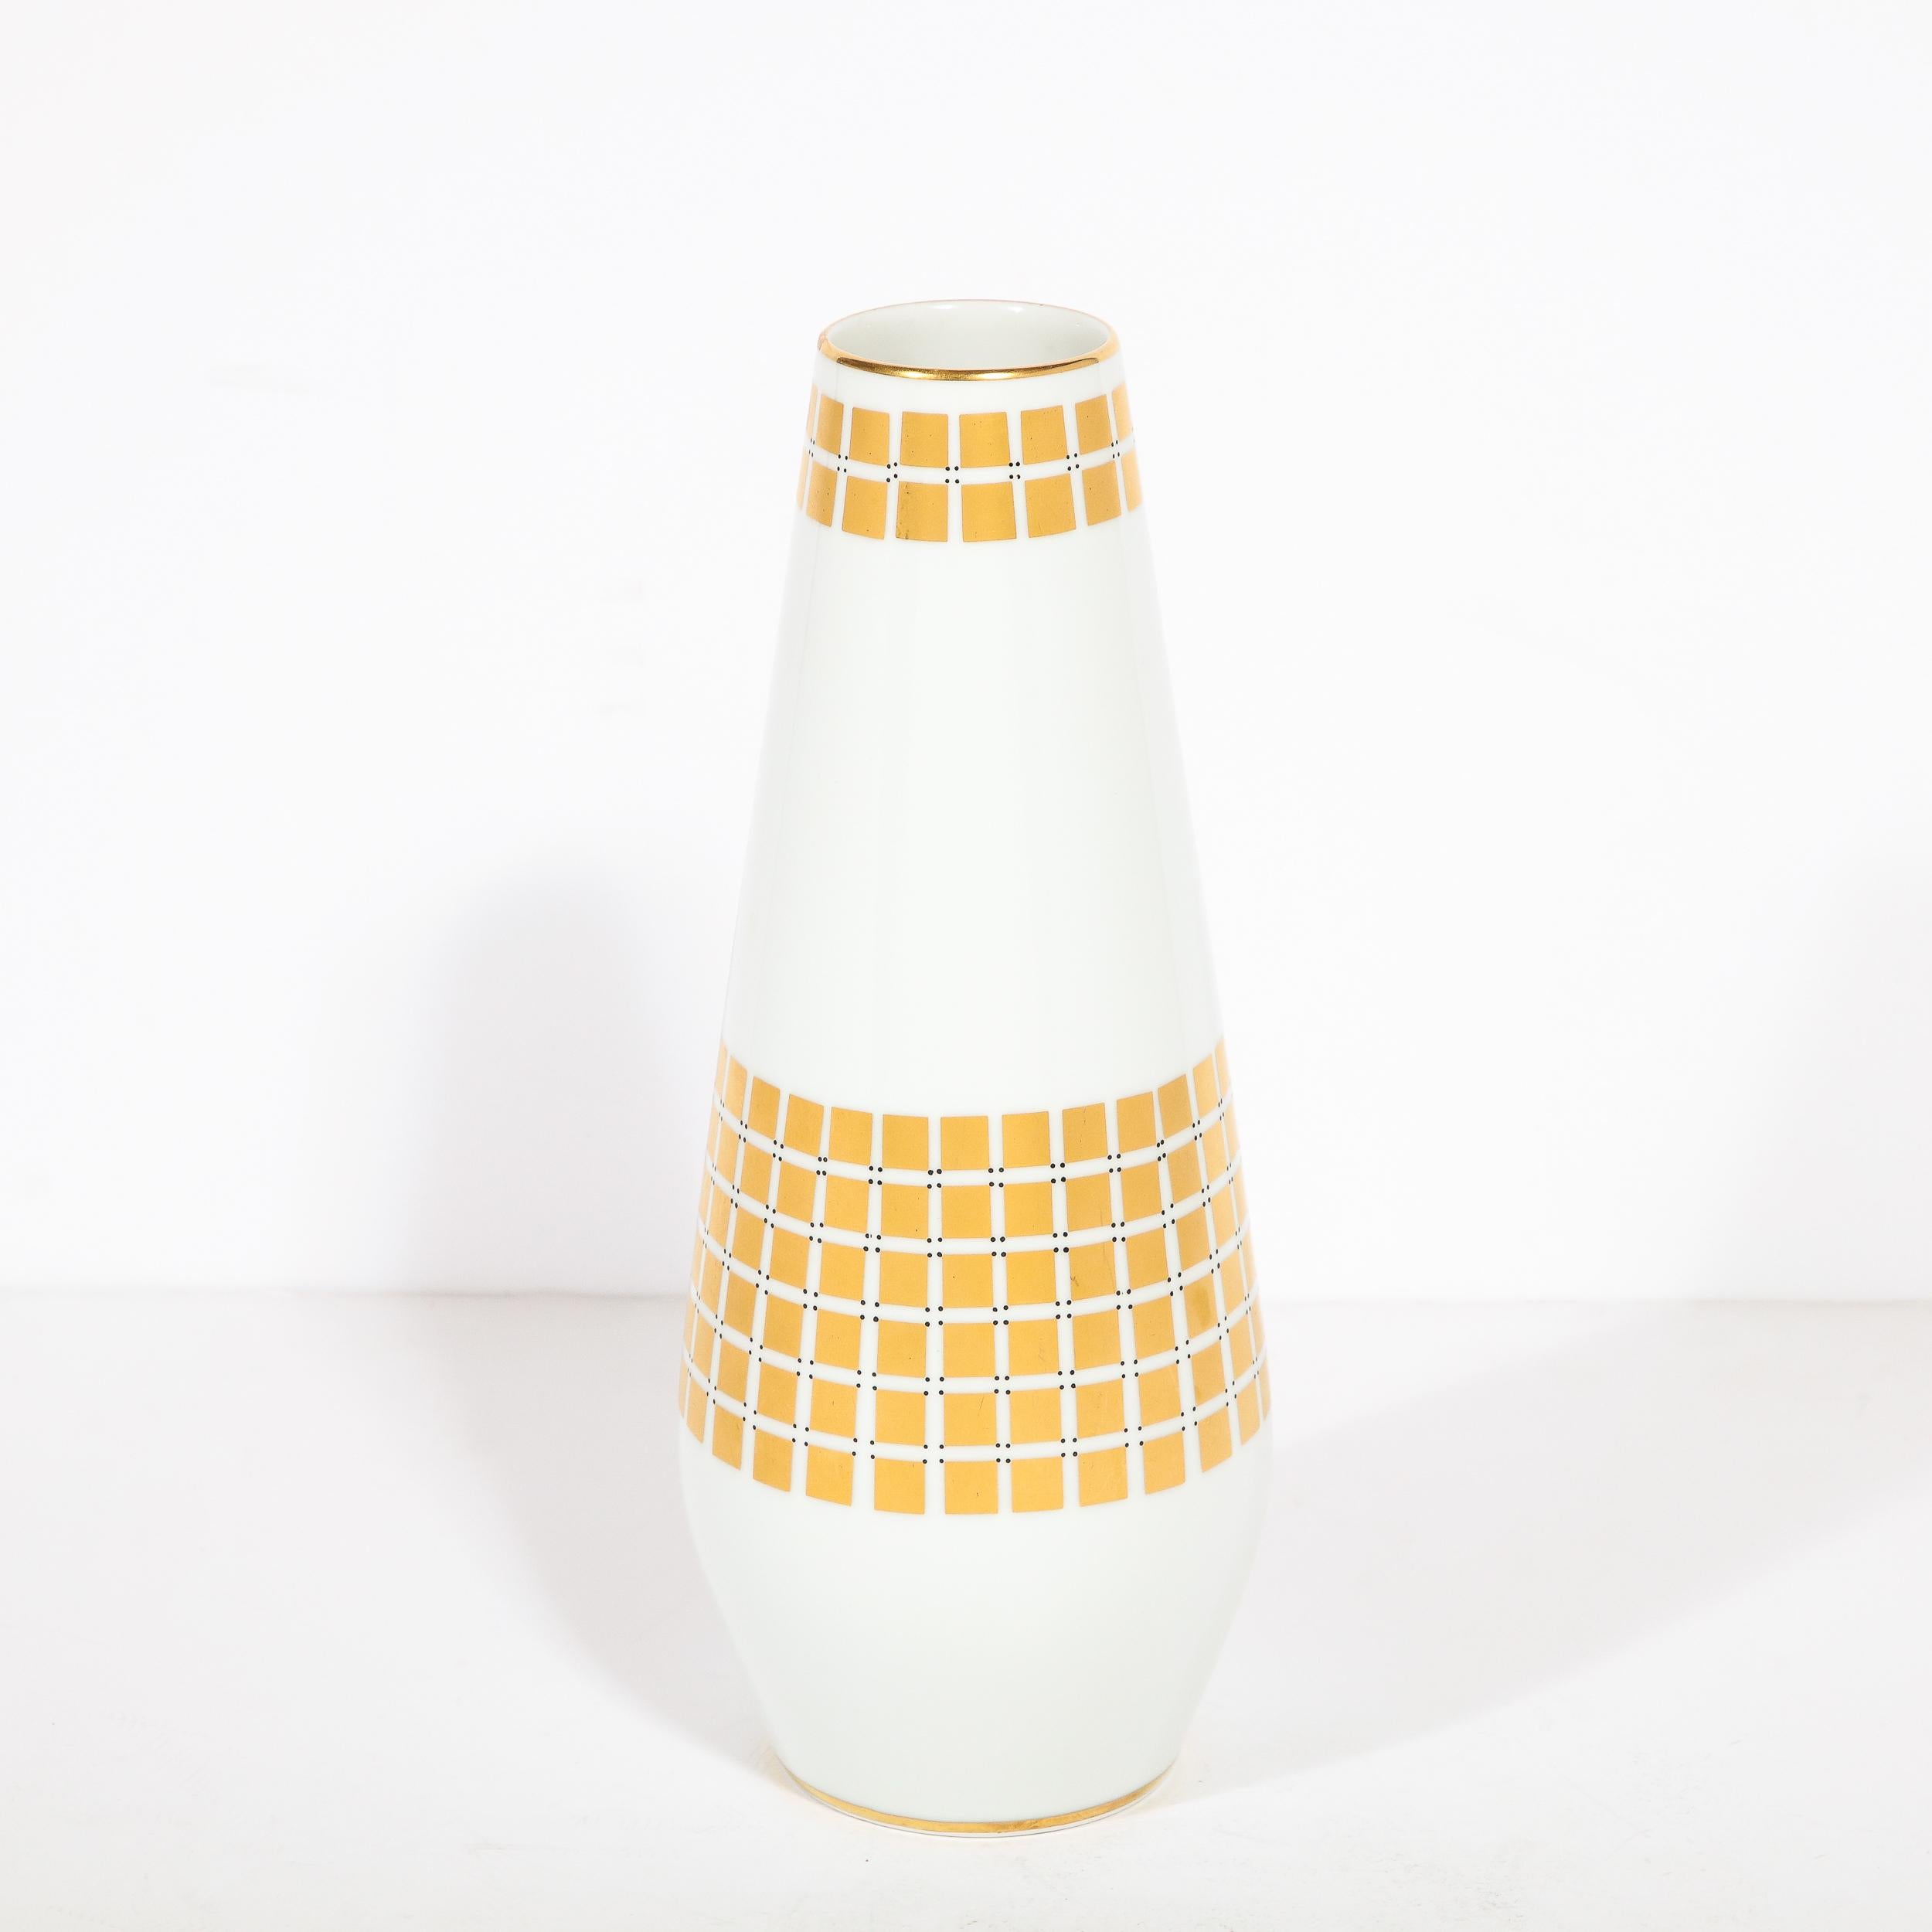 
This elegant Mid Century Modern porcelain vase was realized by the esteemed maker Tirschenheut in Germany circa 1960. It features a cylindrical body in white porcelain that flares subtly from its circular base before tapering to a round mouth. The